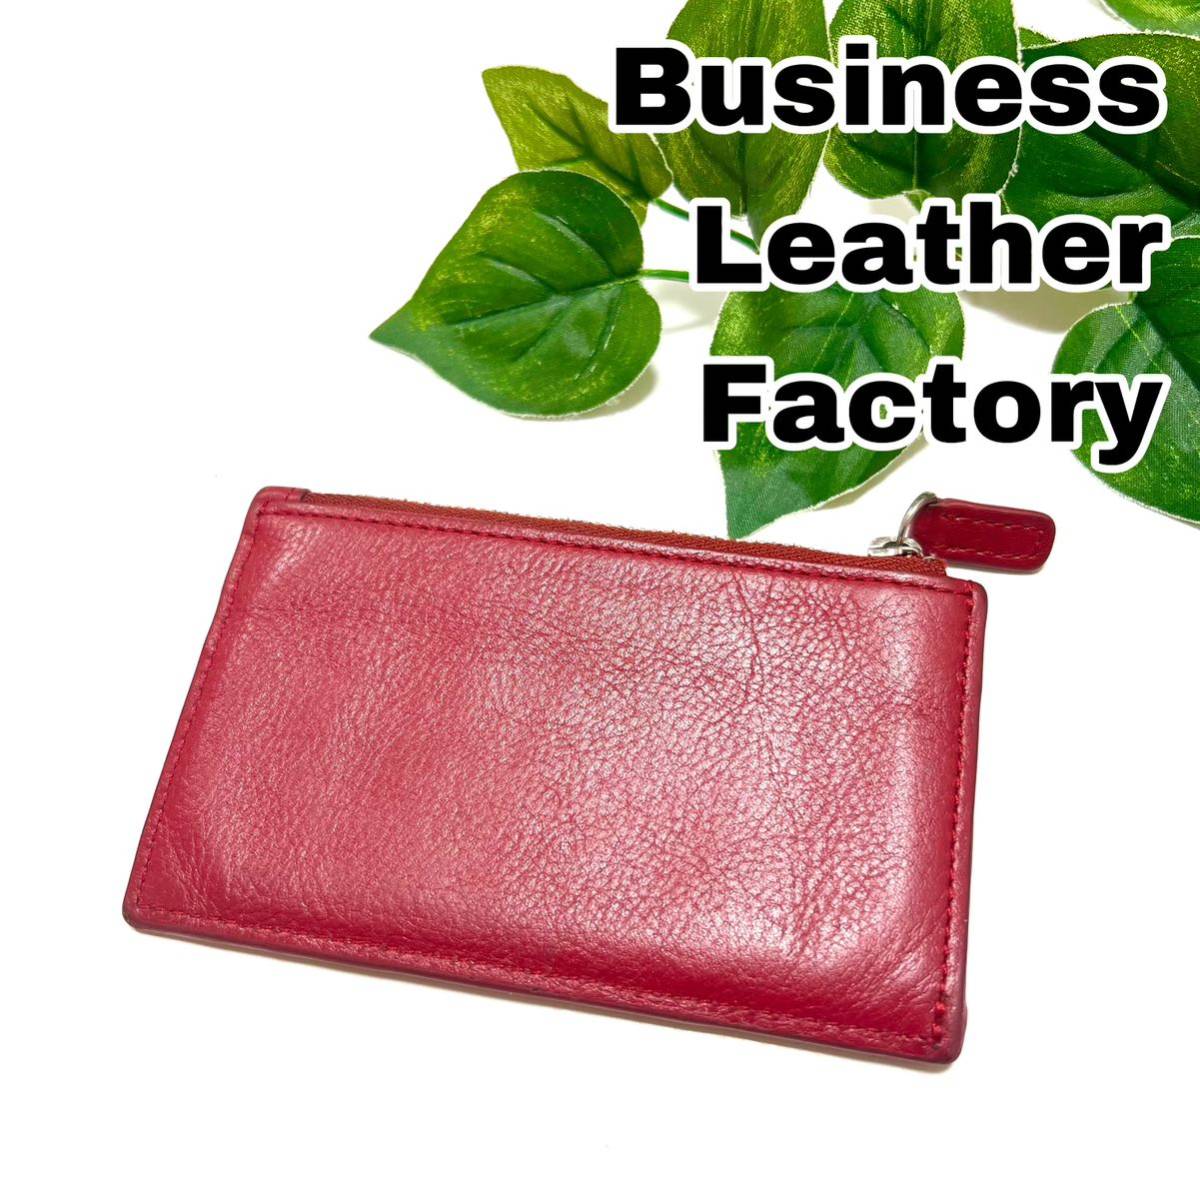 Business Leather Factory カードケース コインケース 赤_画像1